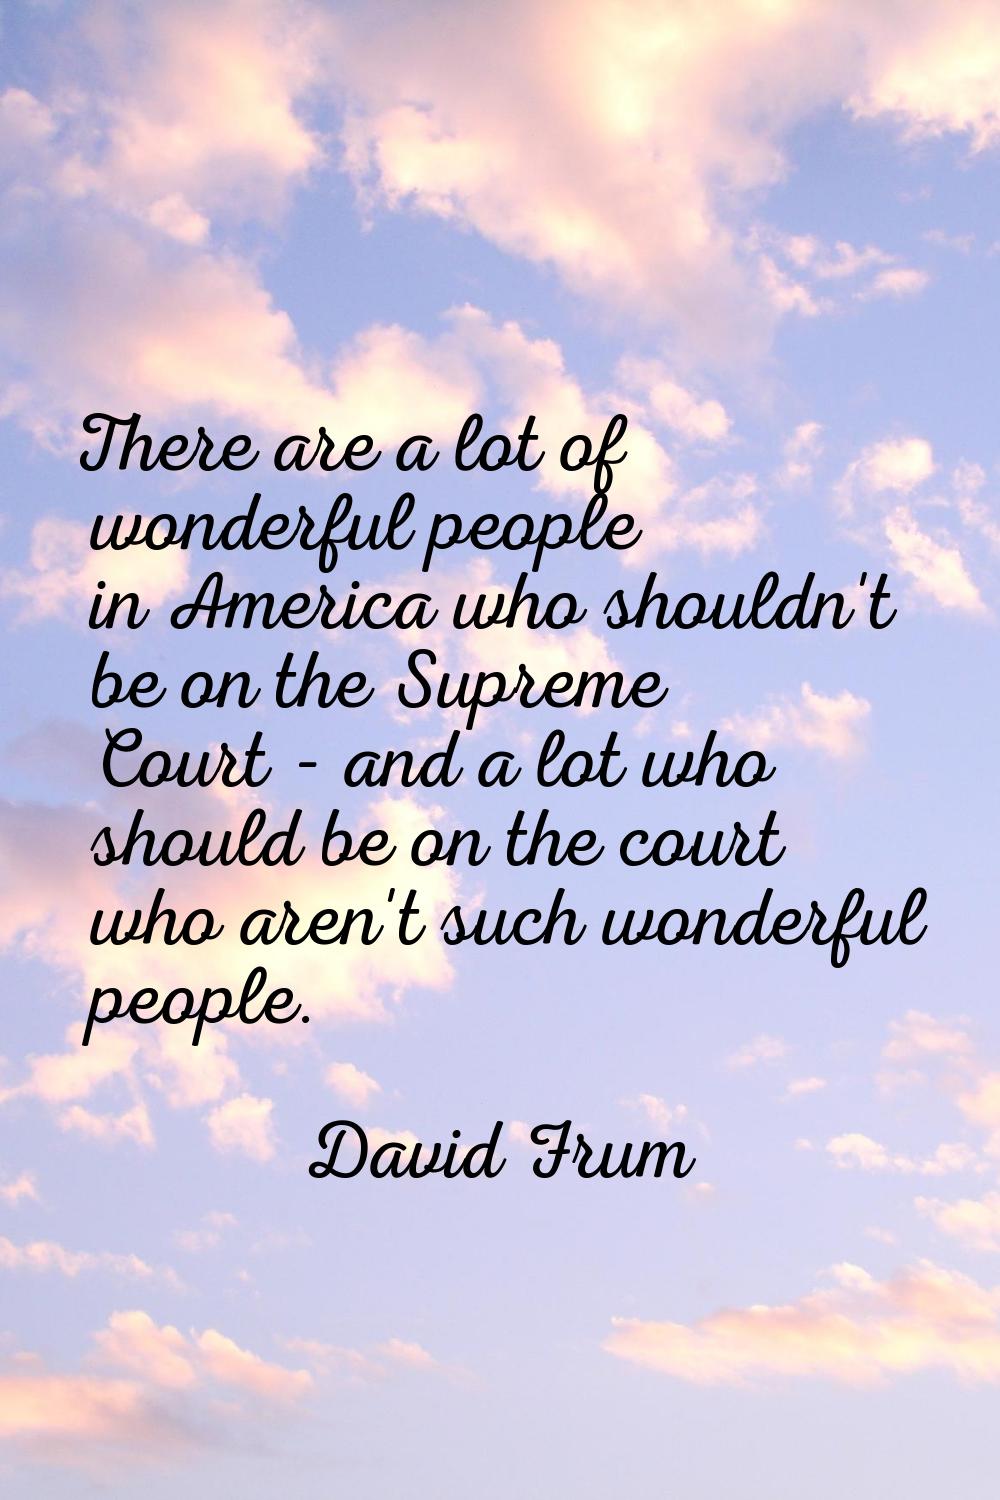 There are a lot of wonderful people in America who shouldn't be on the Supreme Court - and a lot wh